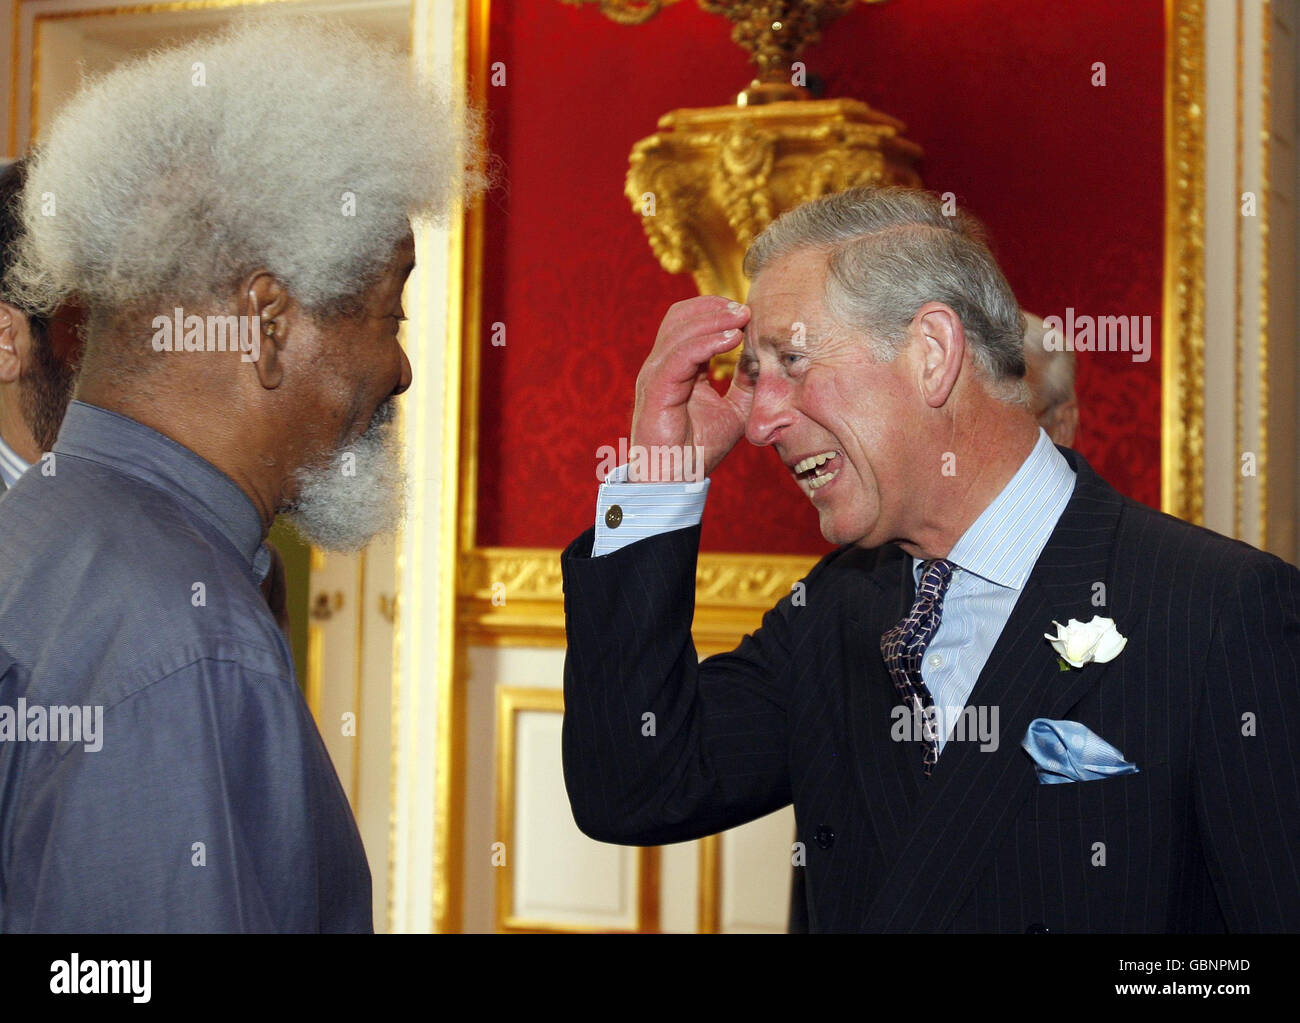 The Prince of Wales, right, Patron of the University of Cambridge Programme for Sustainability Leadership, talks to Professor Wole Soyinka, the 1986 winner of the Nobel Prize in Literature, during a reception for Nobel Laureates and climate change experts at St James's Palace in London. Stock Photo